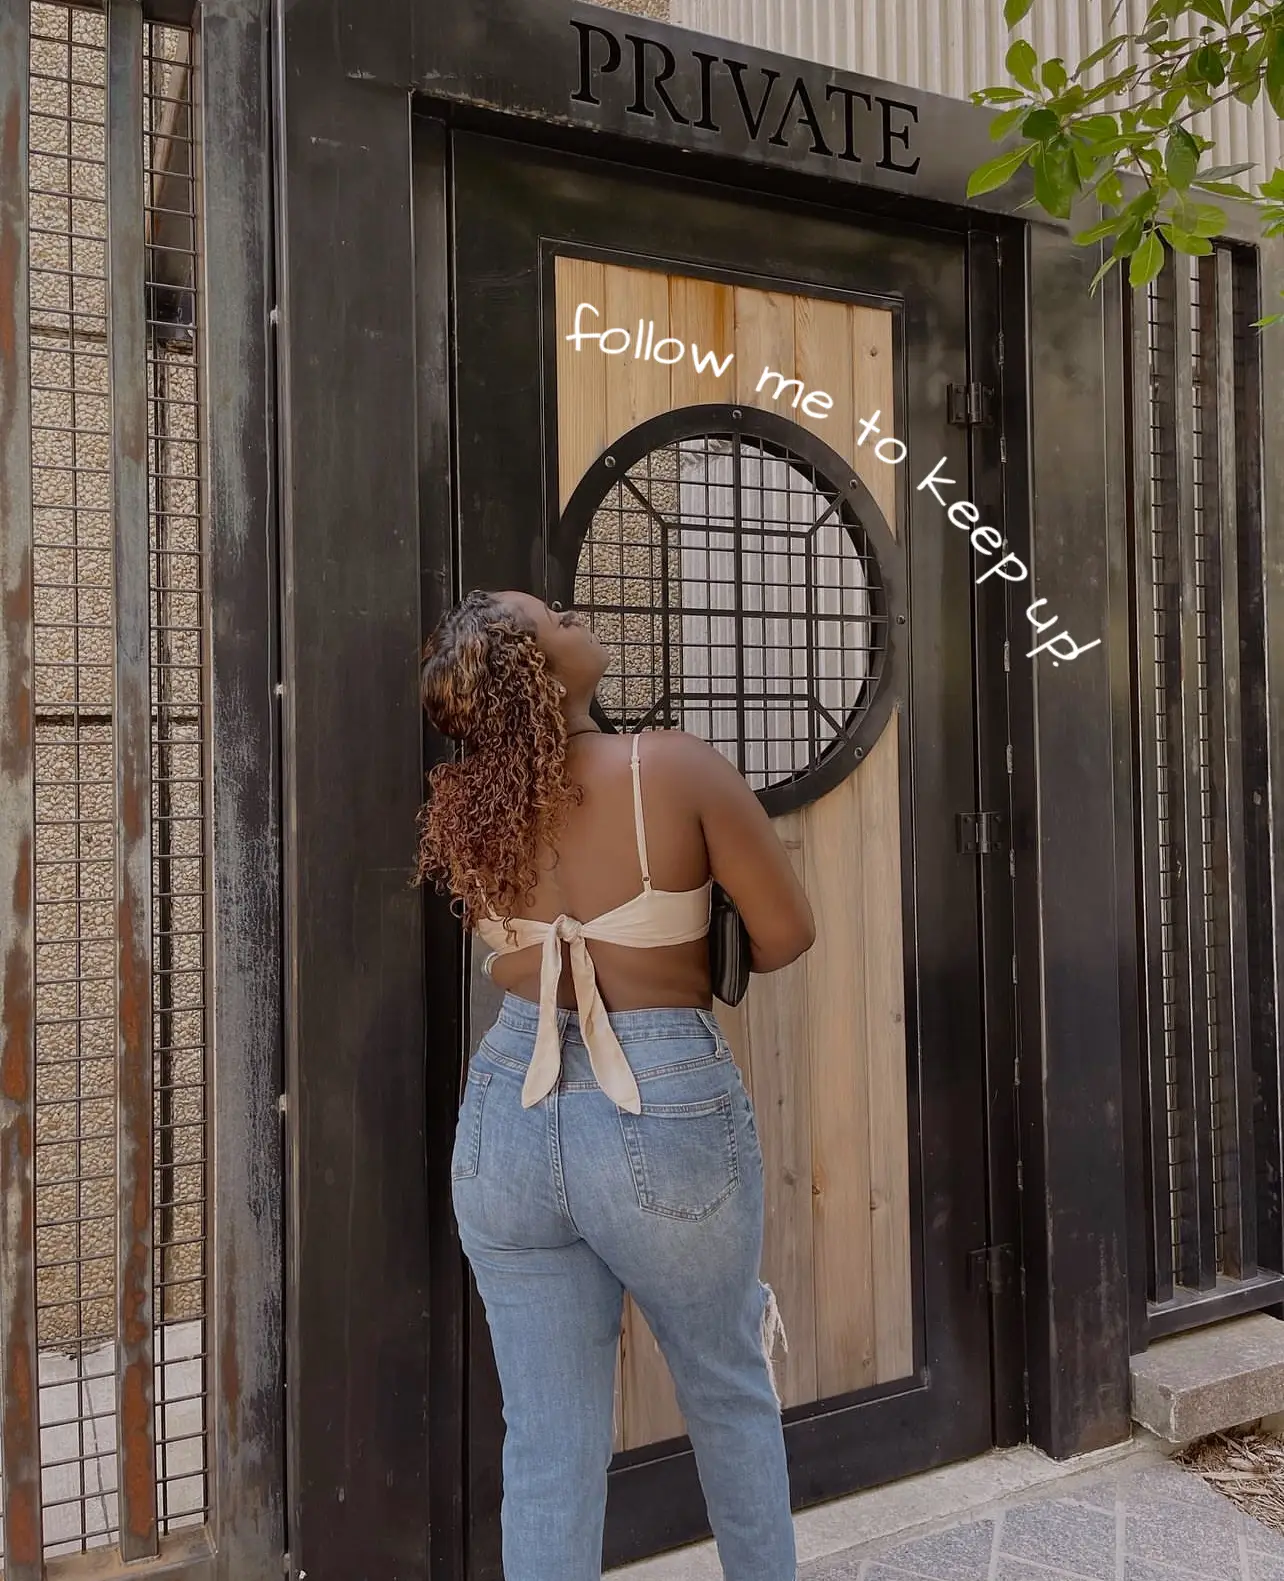  A woman is standing in front of a door, which has a sign above it that says "Private". The woman is wearing a white tank top and jeans.